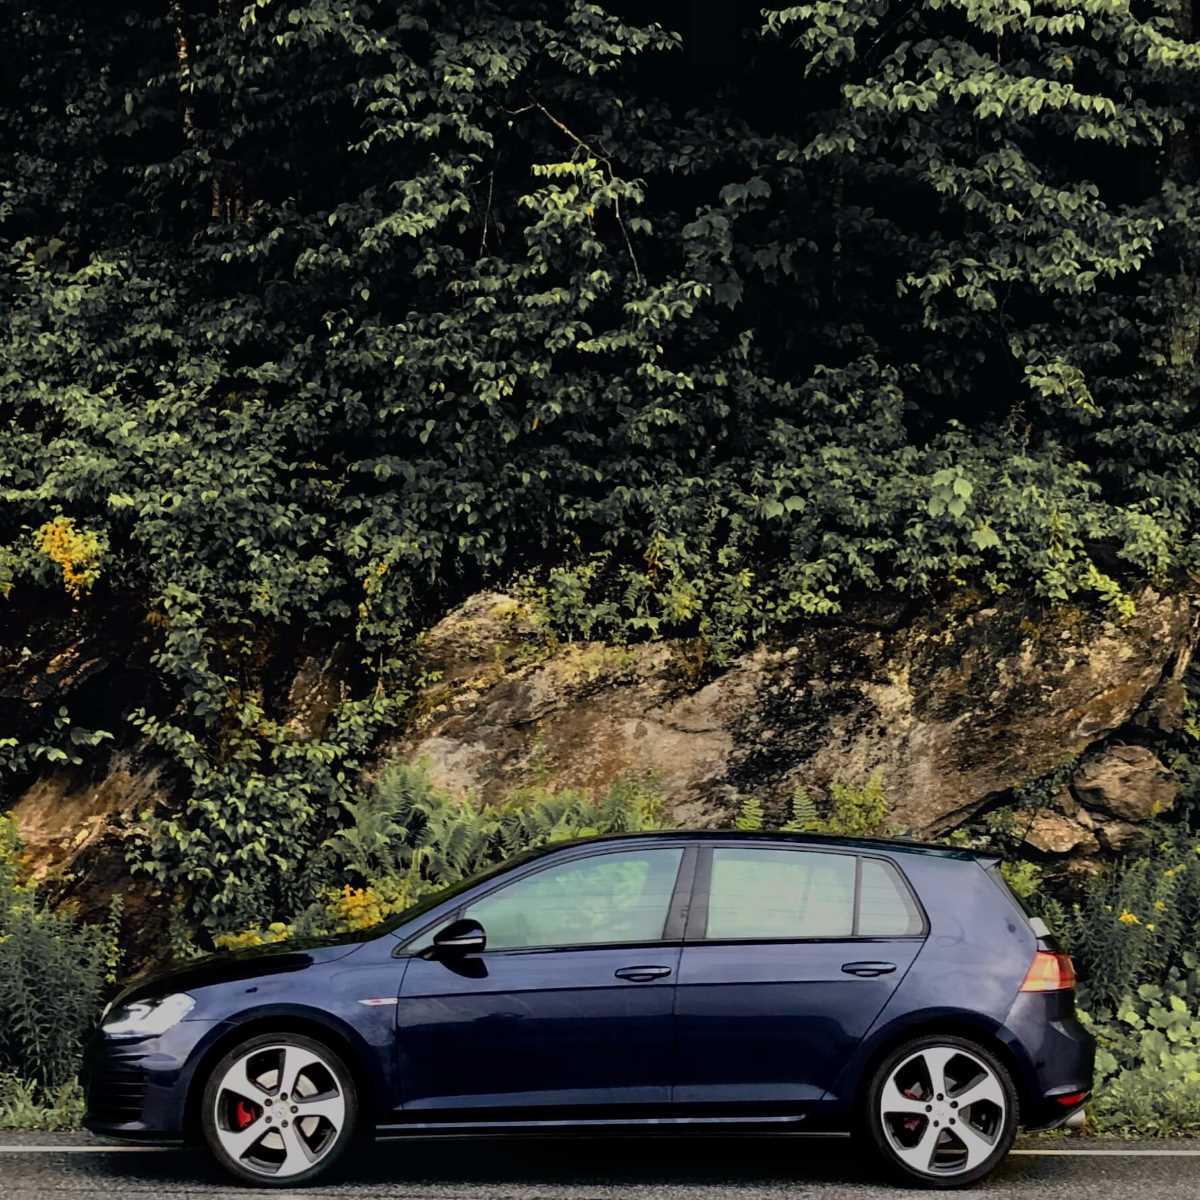 A used MK7 Golf GTI, one of the best road trip cars